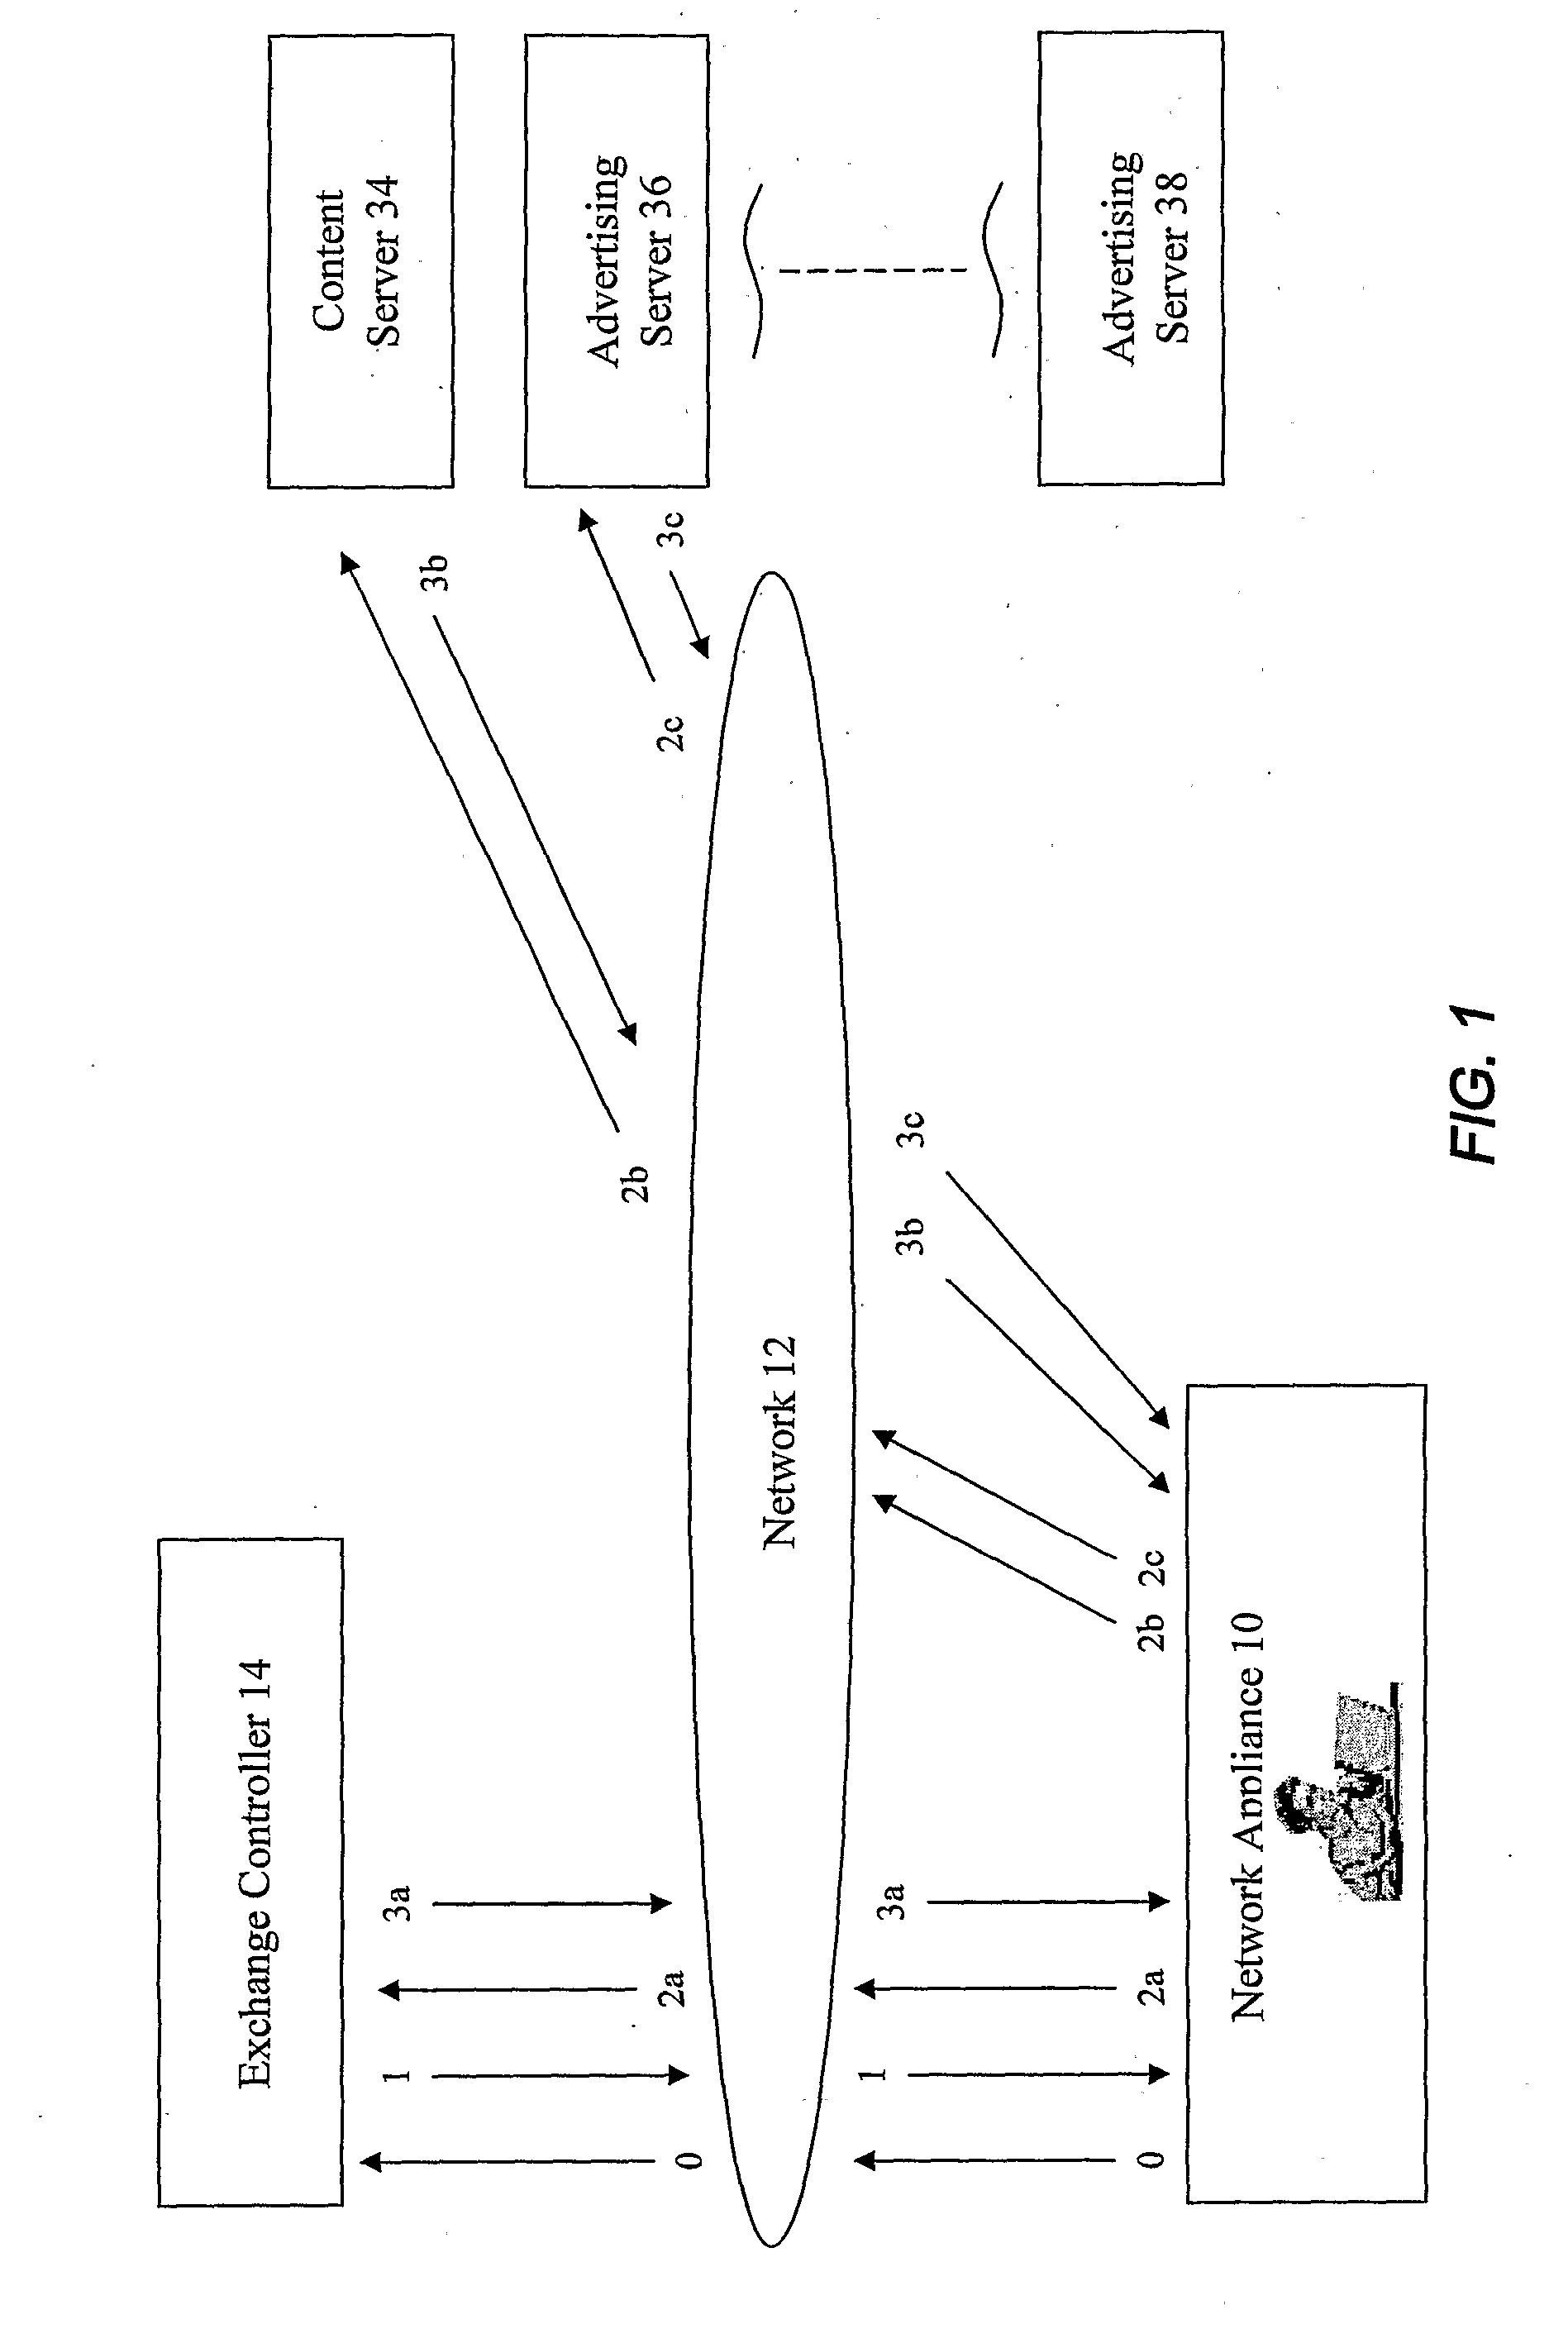 Distributed content exchange and presentation system